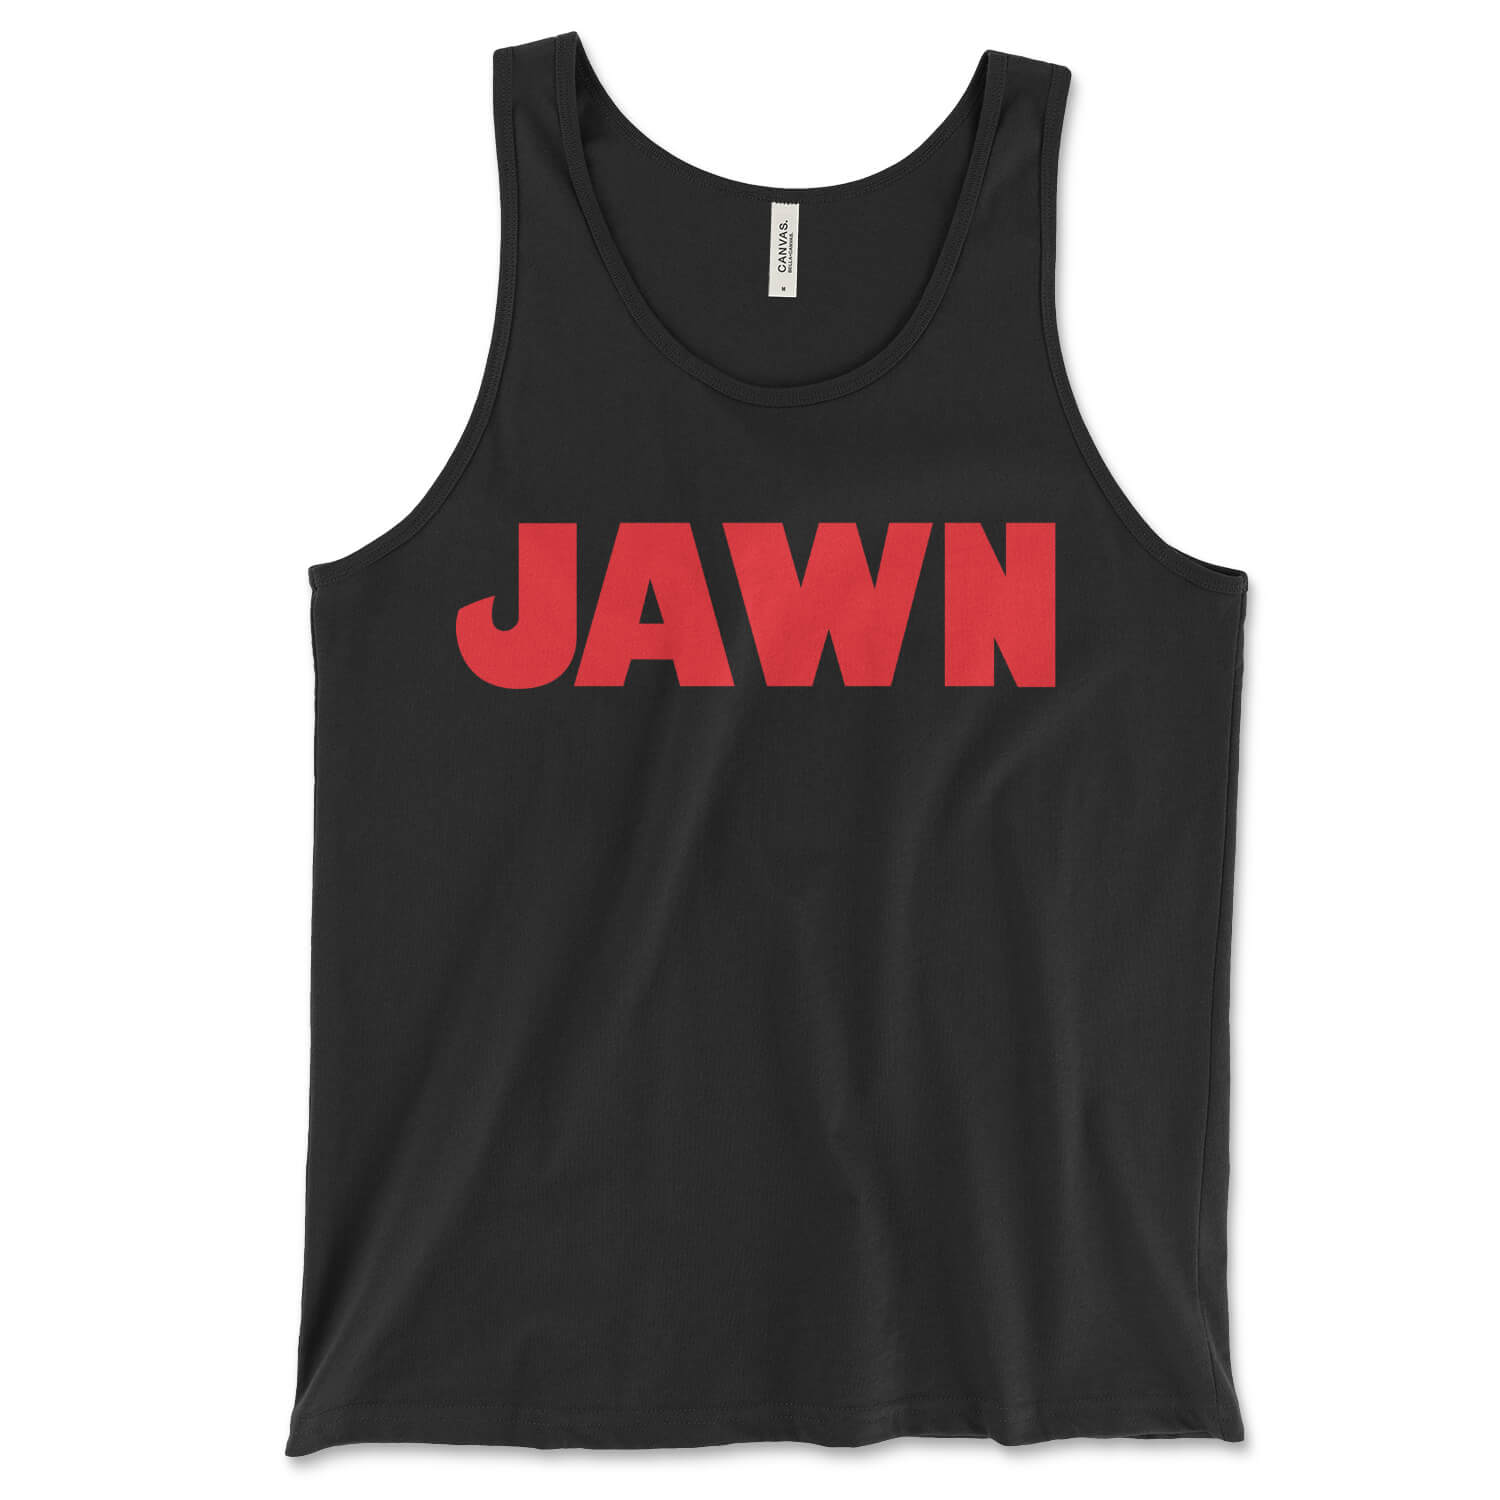 Philadelphia Philly jawn jaws black tank top from Phillygoat